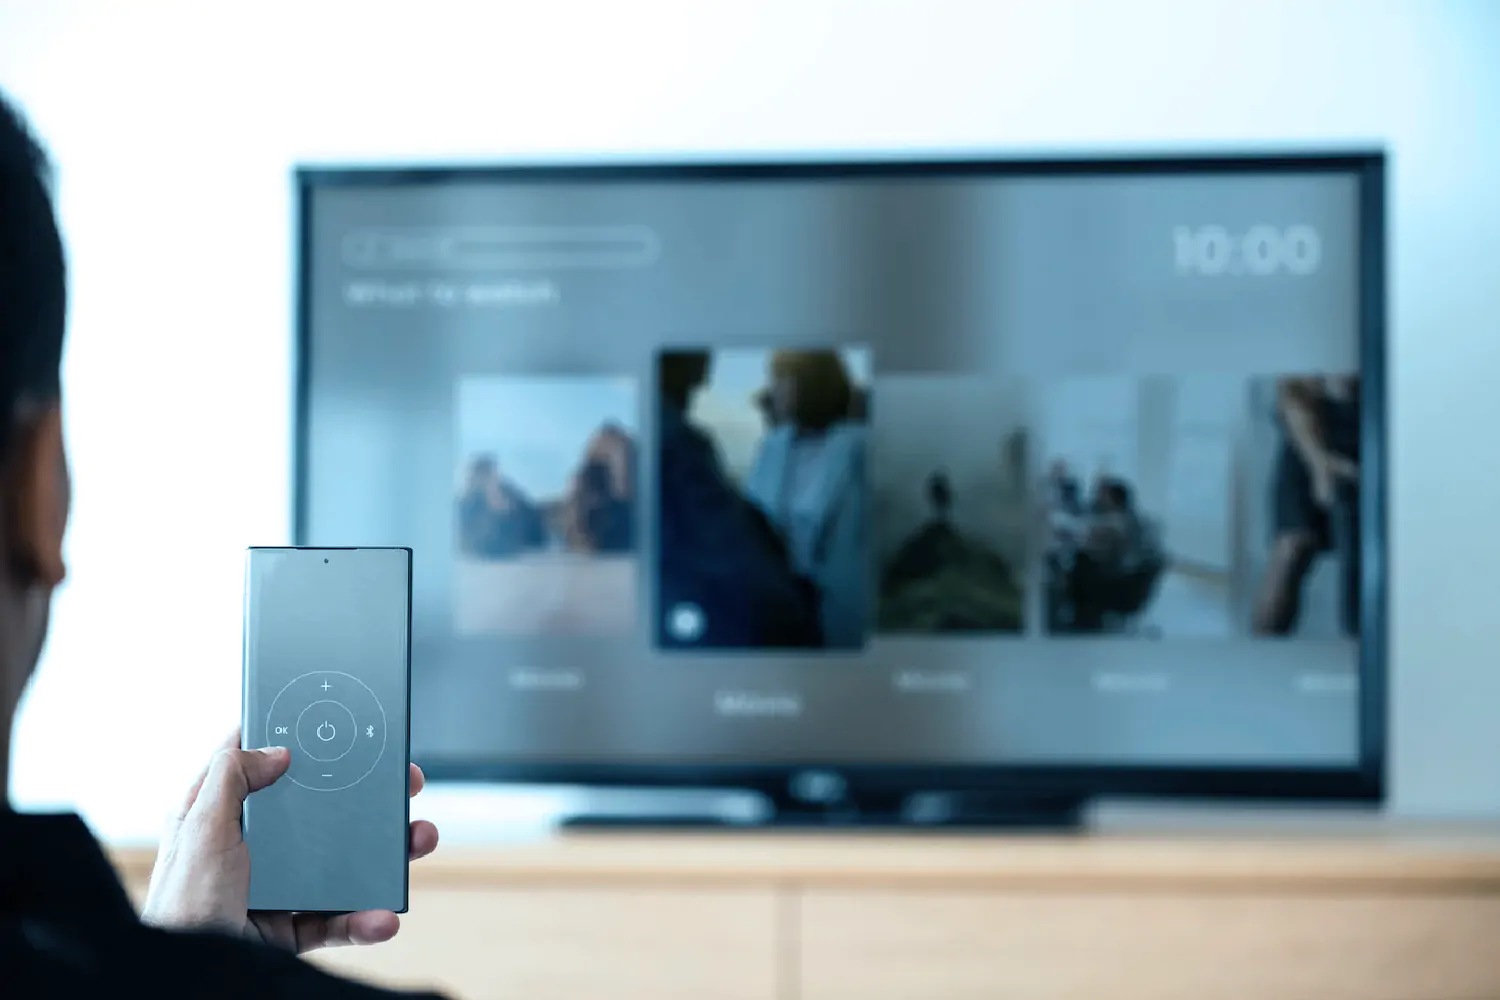 man-changing-tv-channel-by-his-smartphone-smart-home-neiroom-1